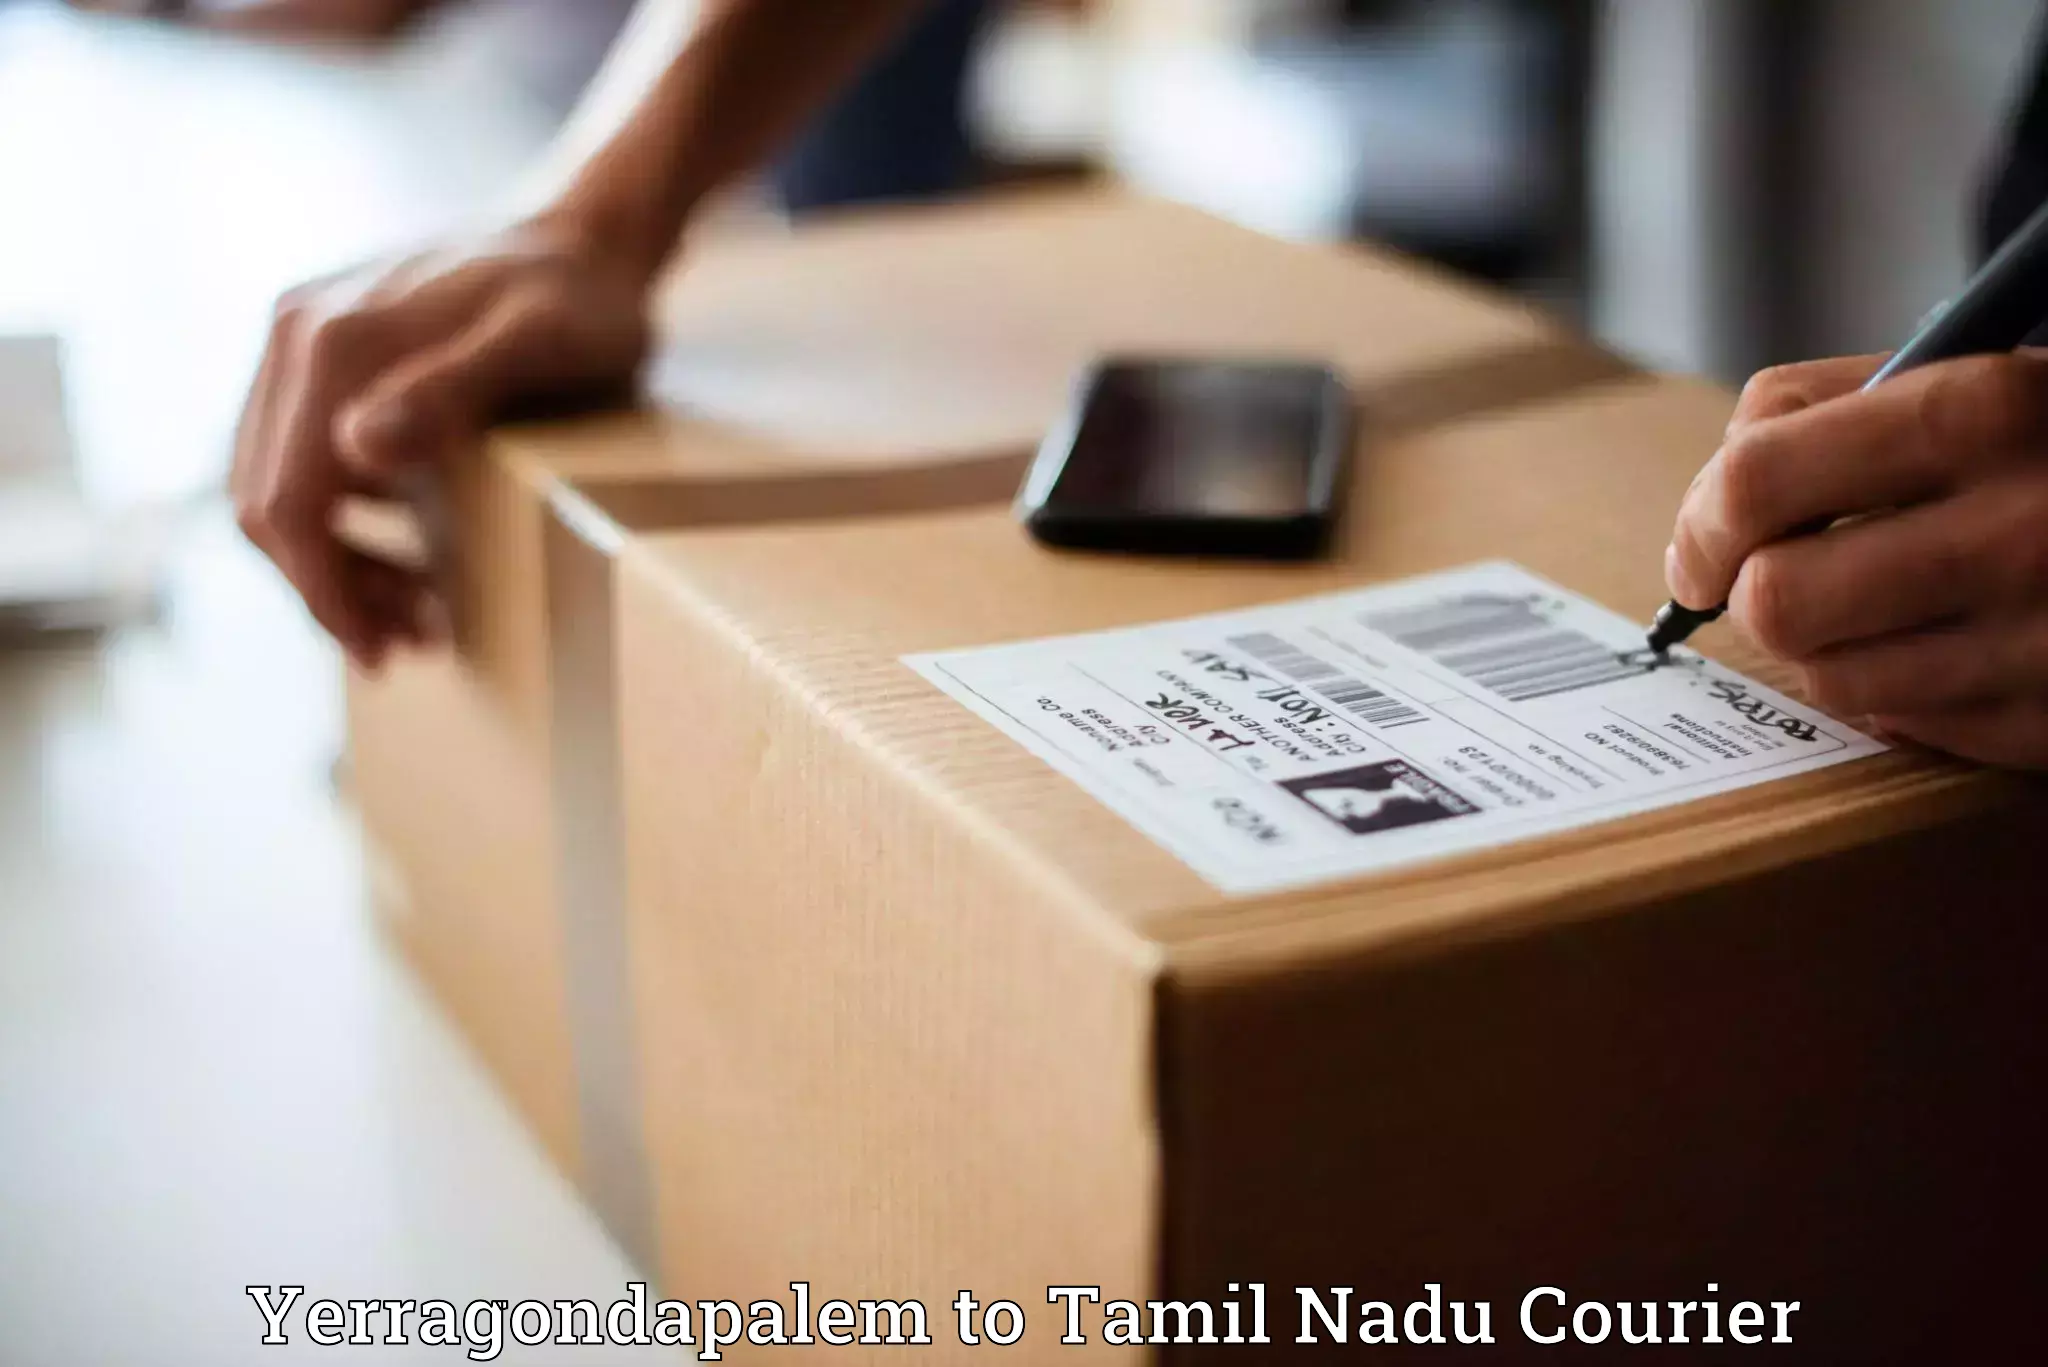 Quality courier services in Yerragondapalem to Periyakulam